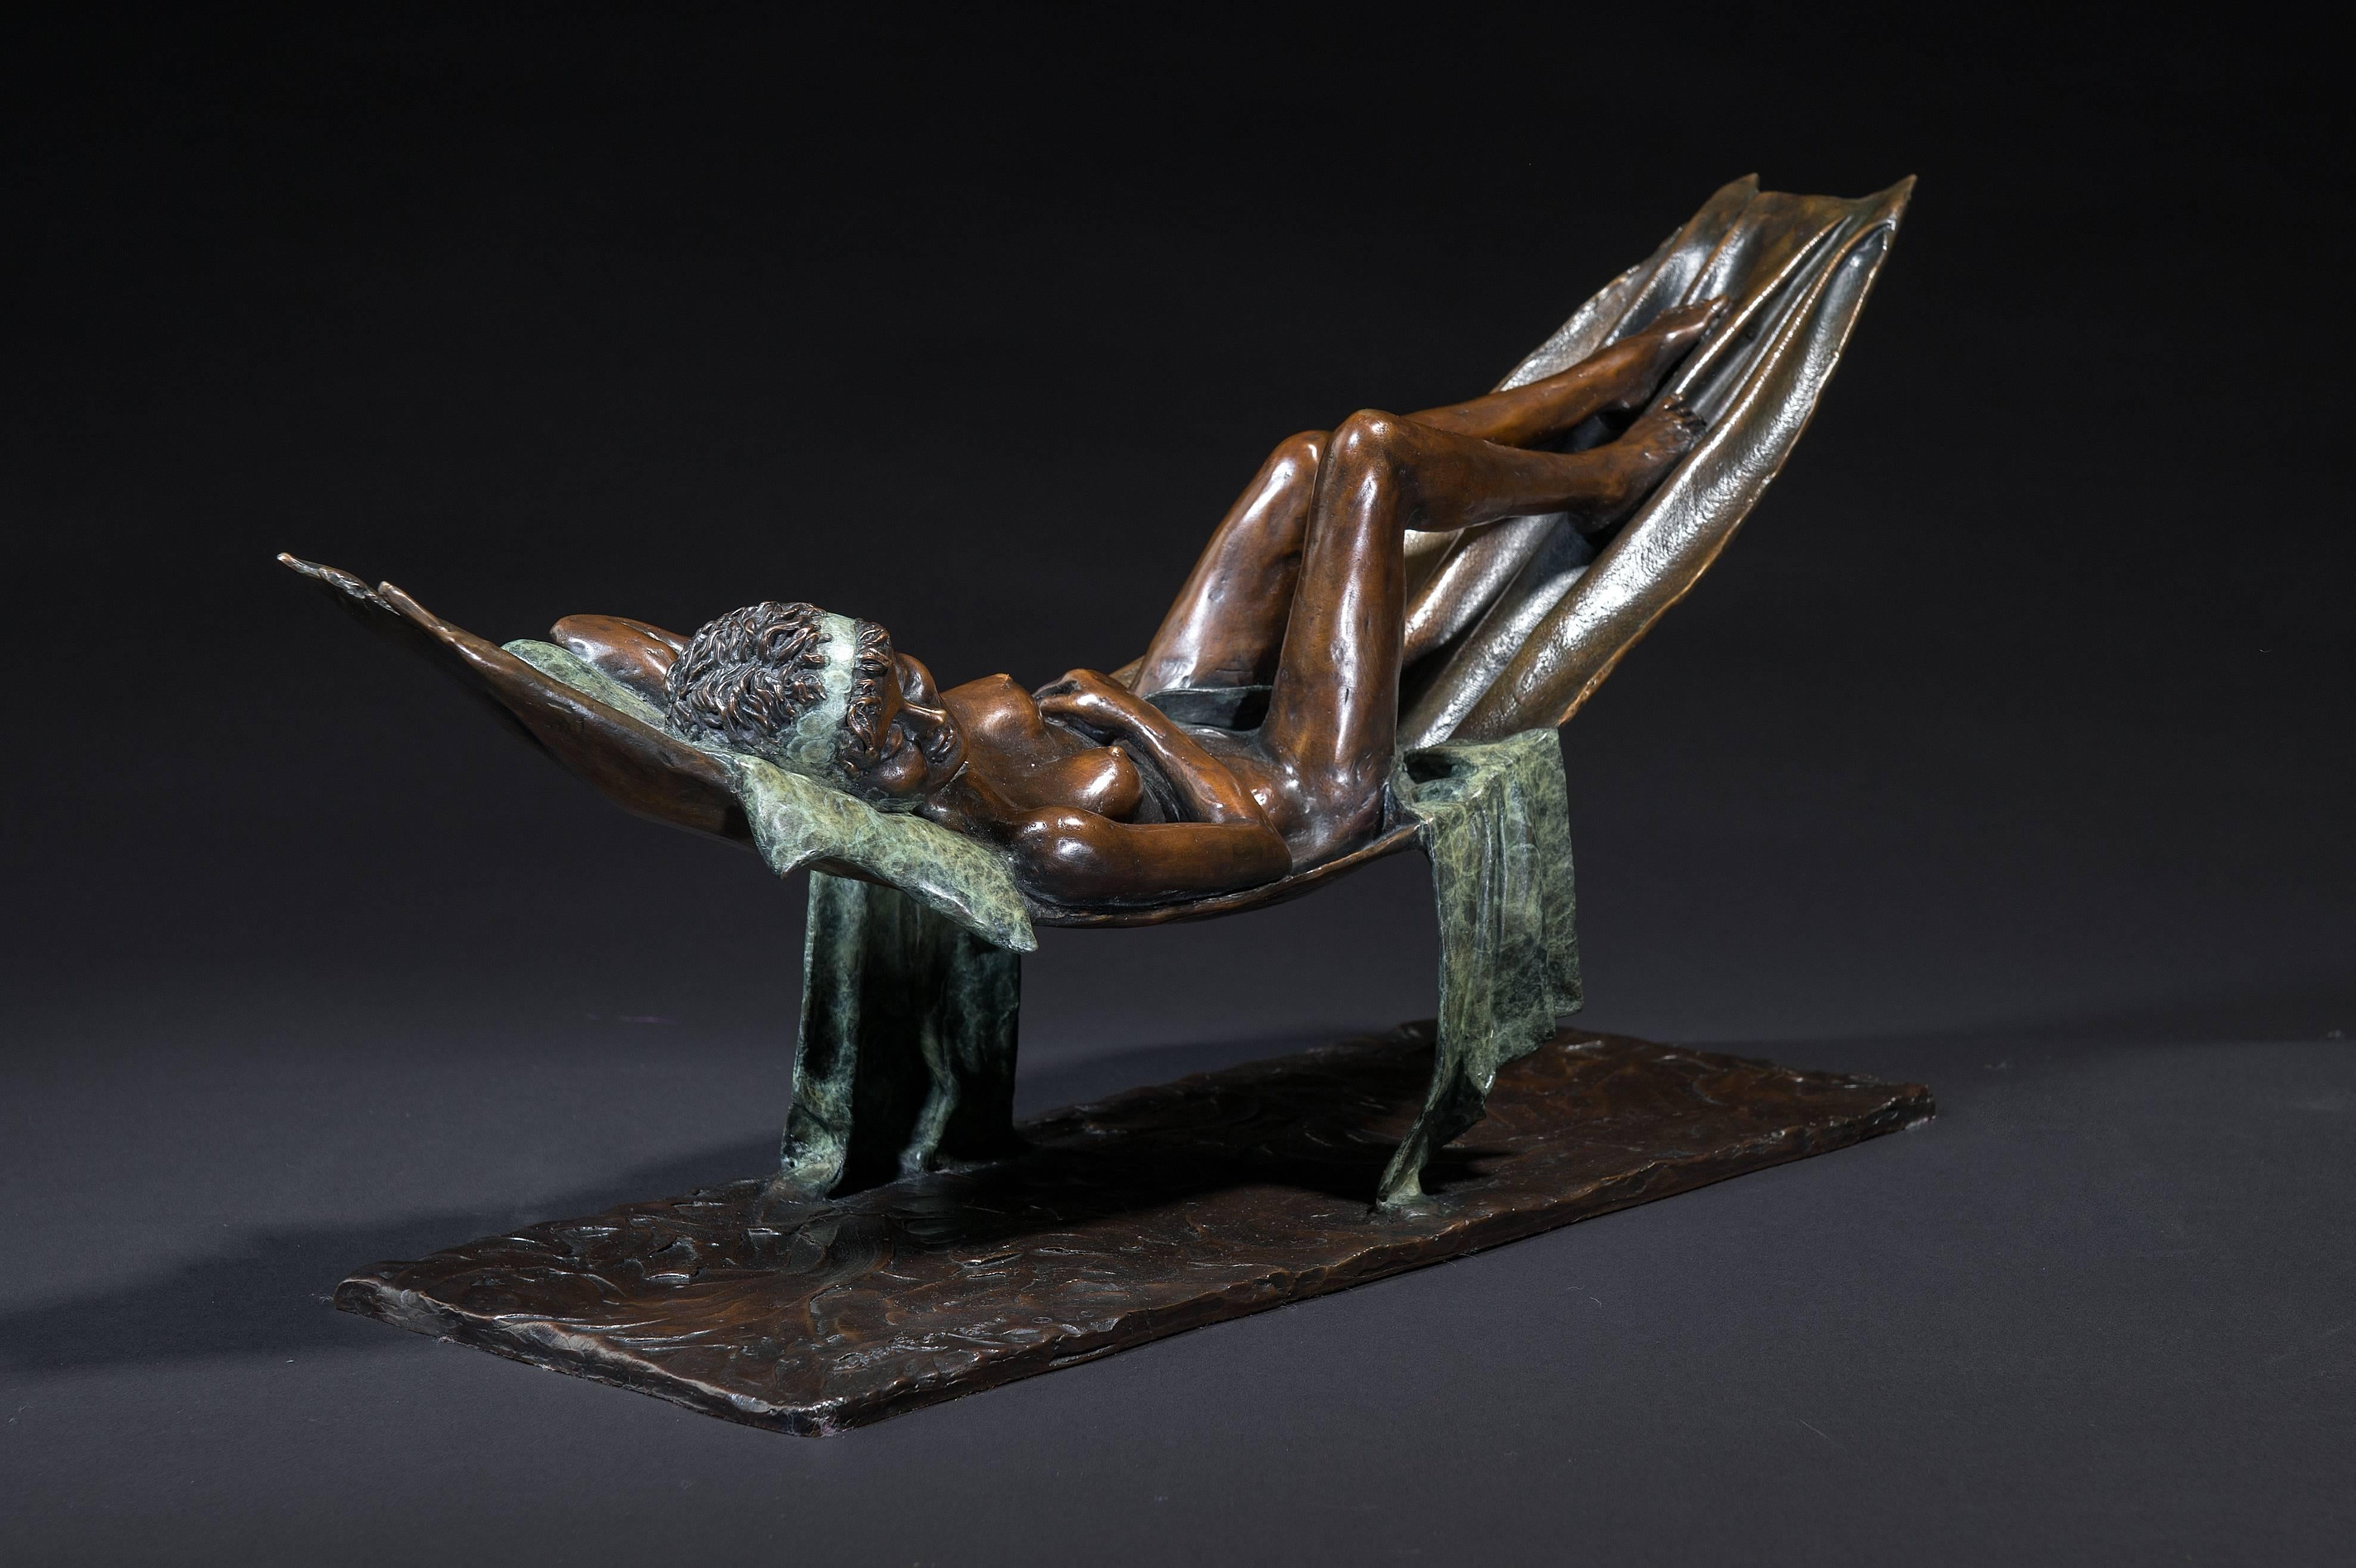 For Benson Landes, sculpture was most definitely a passion. His oeuvre of cast bronzes is populated with ‘off duty’ ballet dancers, rather wistful women, often caught in moments of solitary repose.  Such an obvious appreciation of the grace and